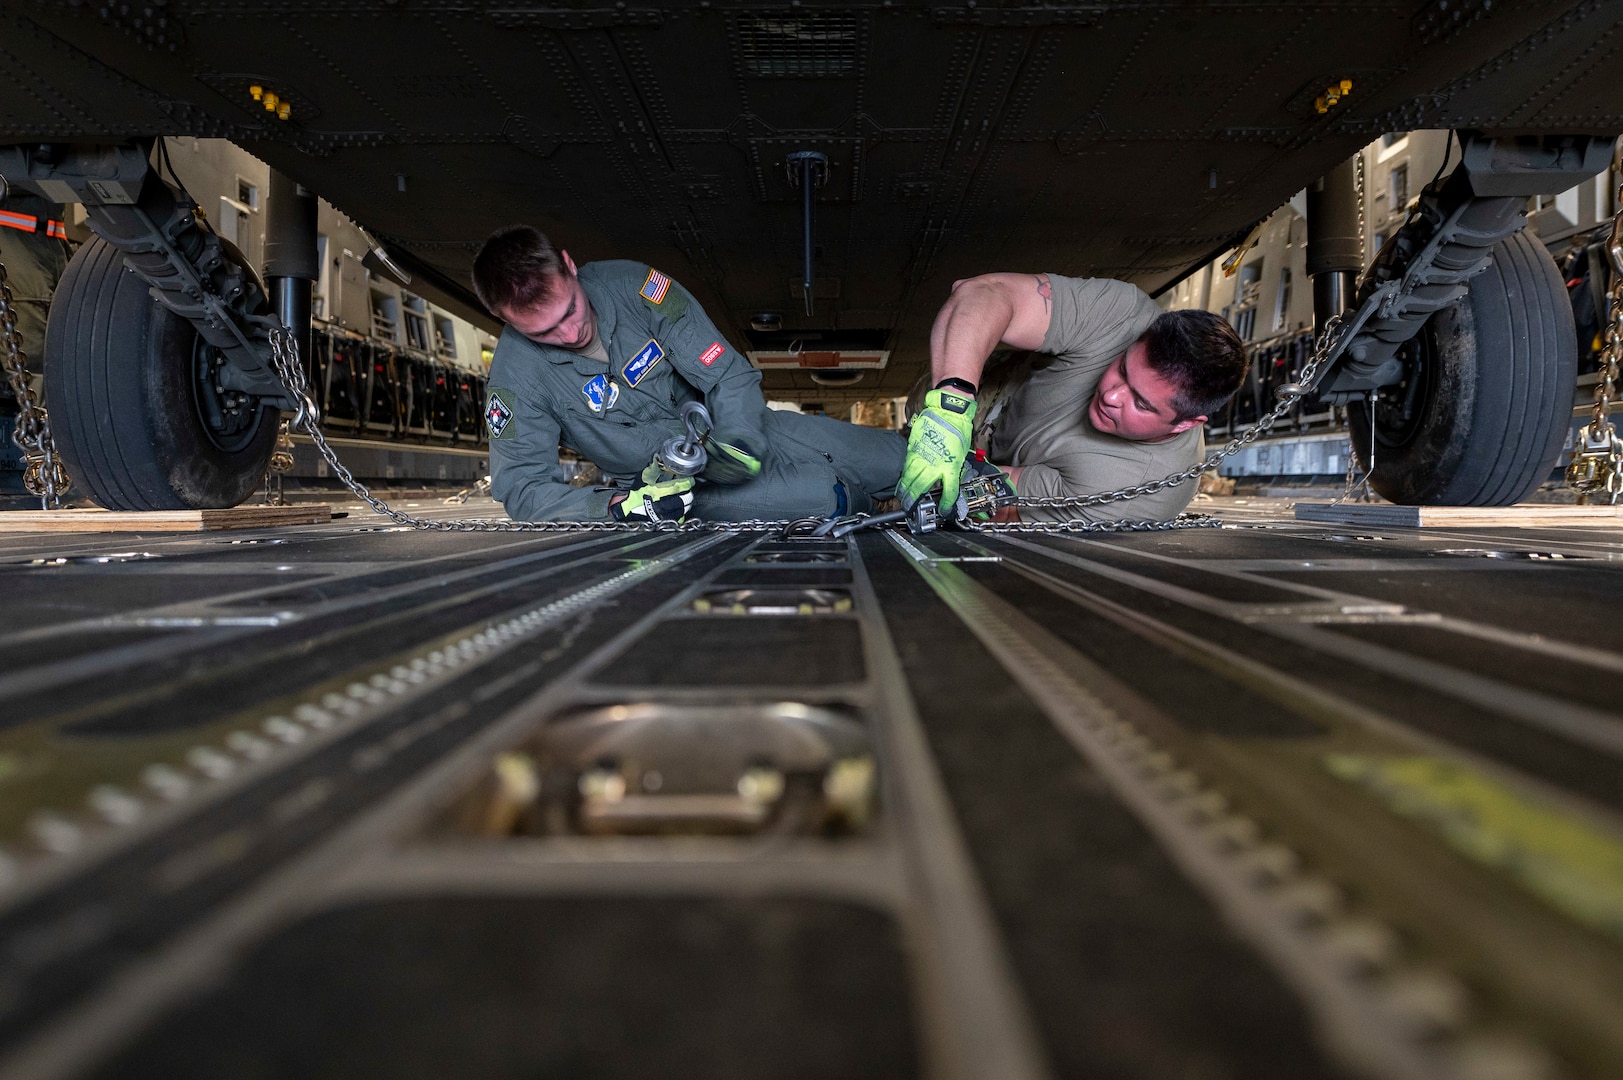 two men lay on the floor of an aircraft to attach chains to the floor